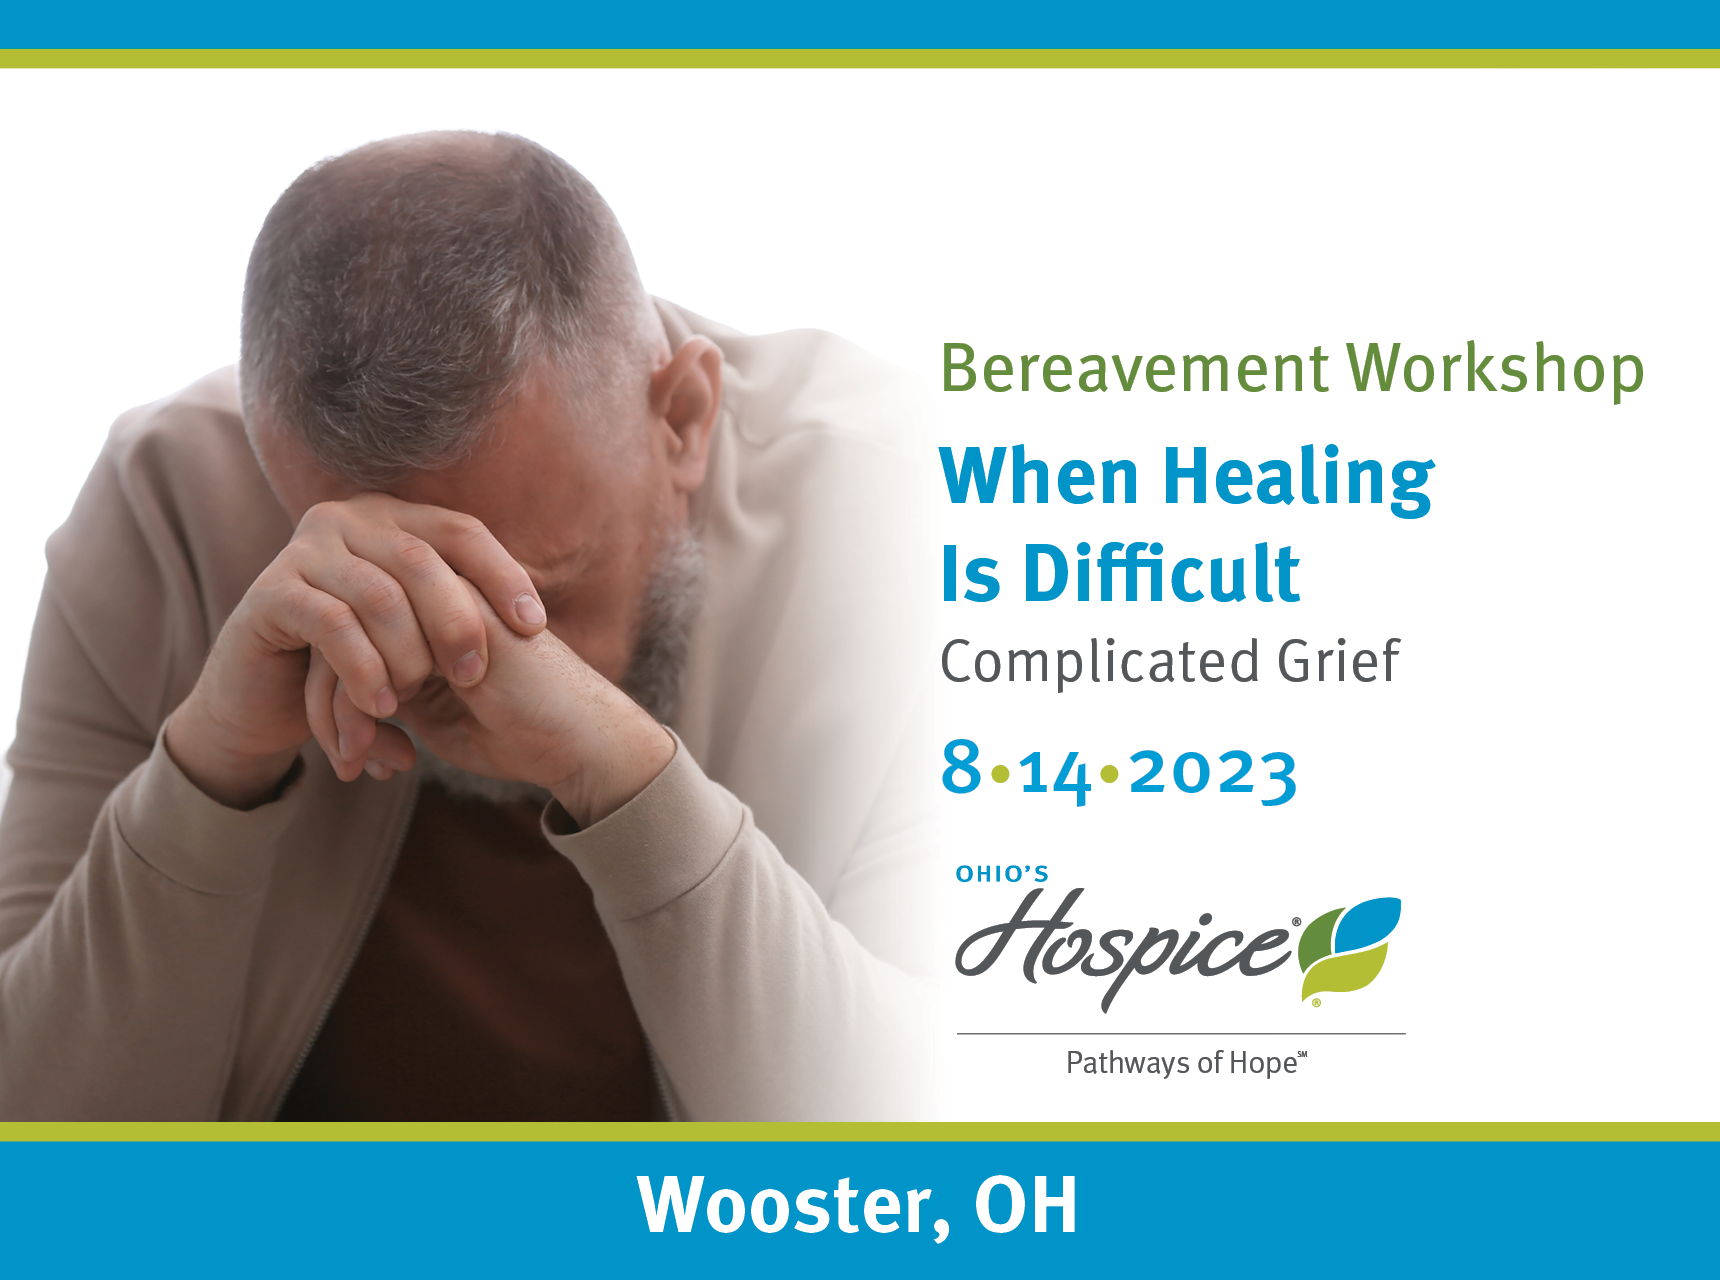 Bereavement Workshop. When Healing Is Difficult. Complicated Grief. 8.14.2023. Ohio's Hospice Pathways of Hope. Wooster, OH